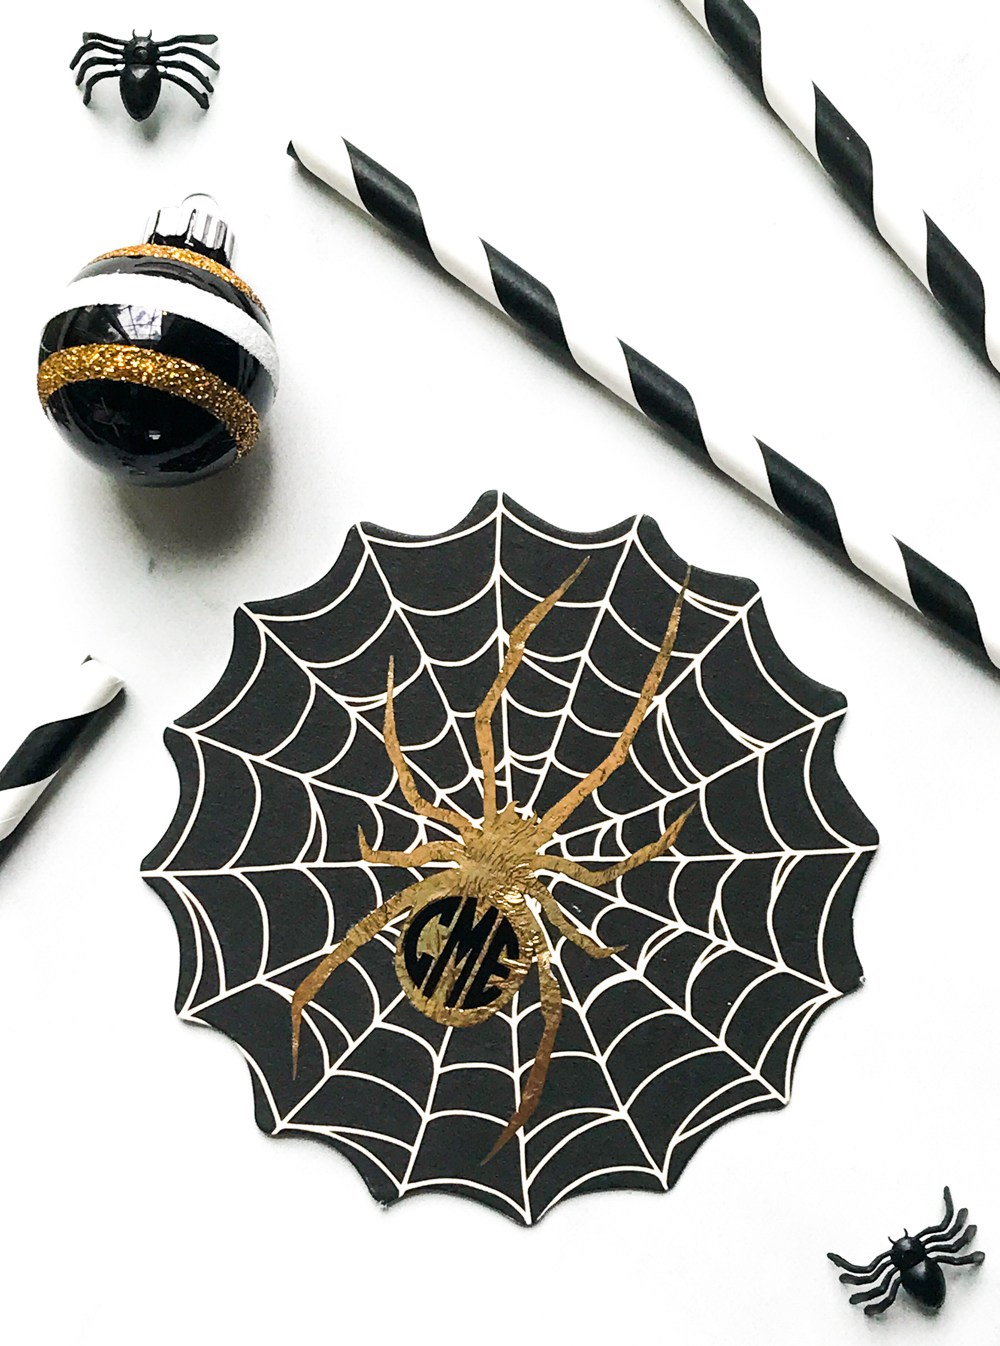 DIY black, white and gold spiderweb coasters for Halloween